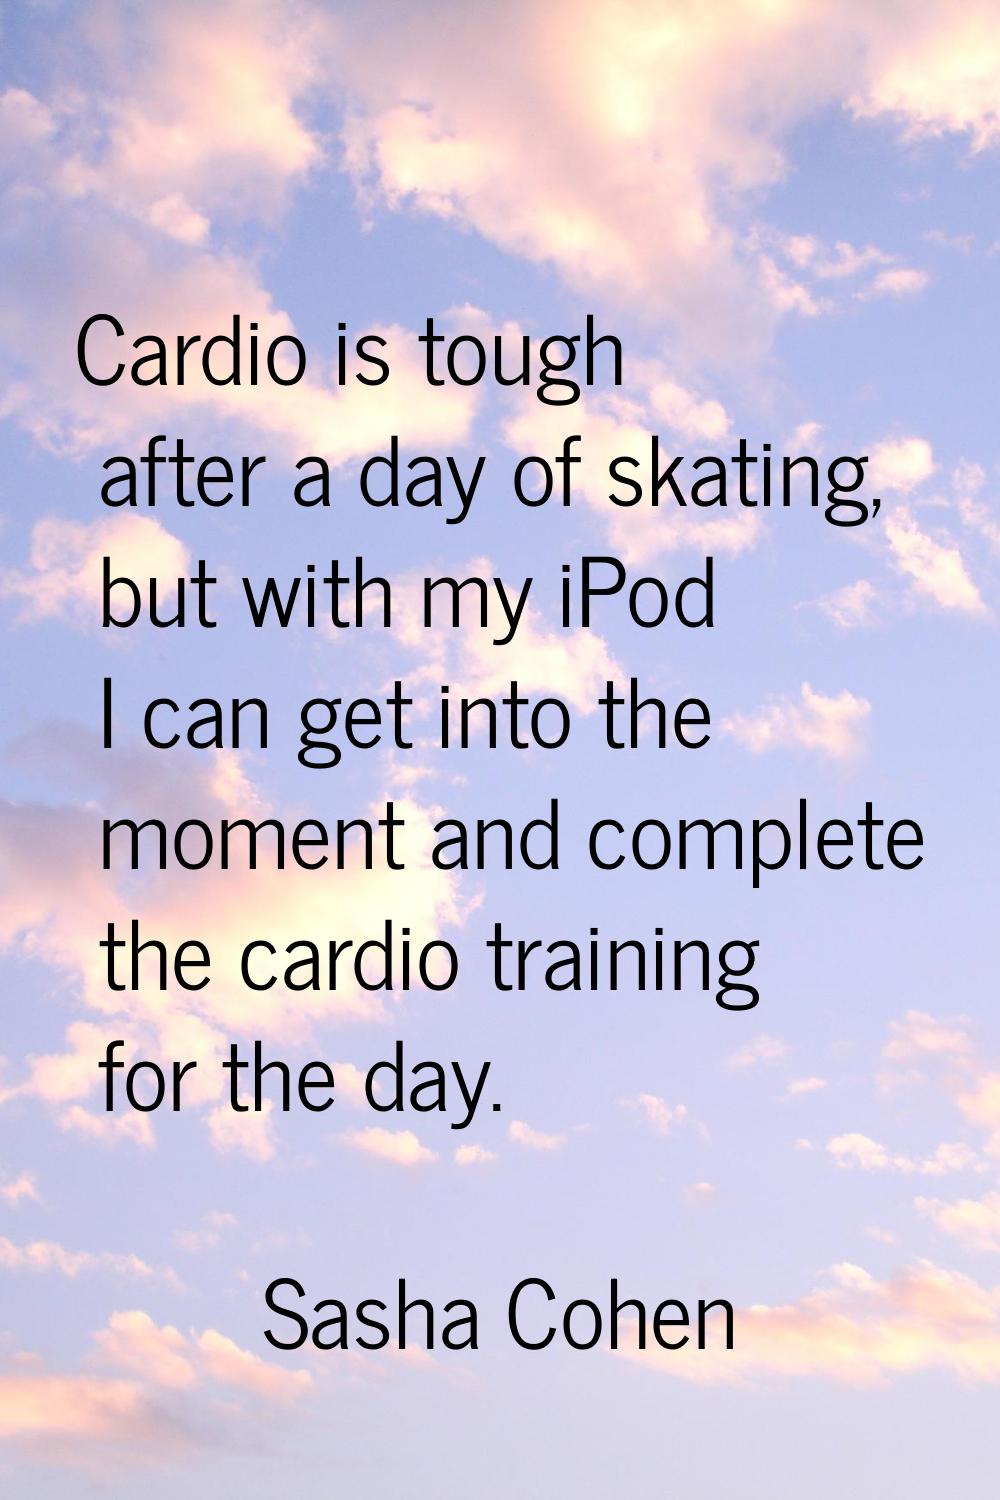 Cardio is tough after a day of skating, but with my iPod I can get into the moment and complete the